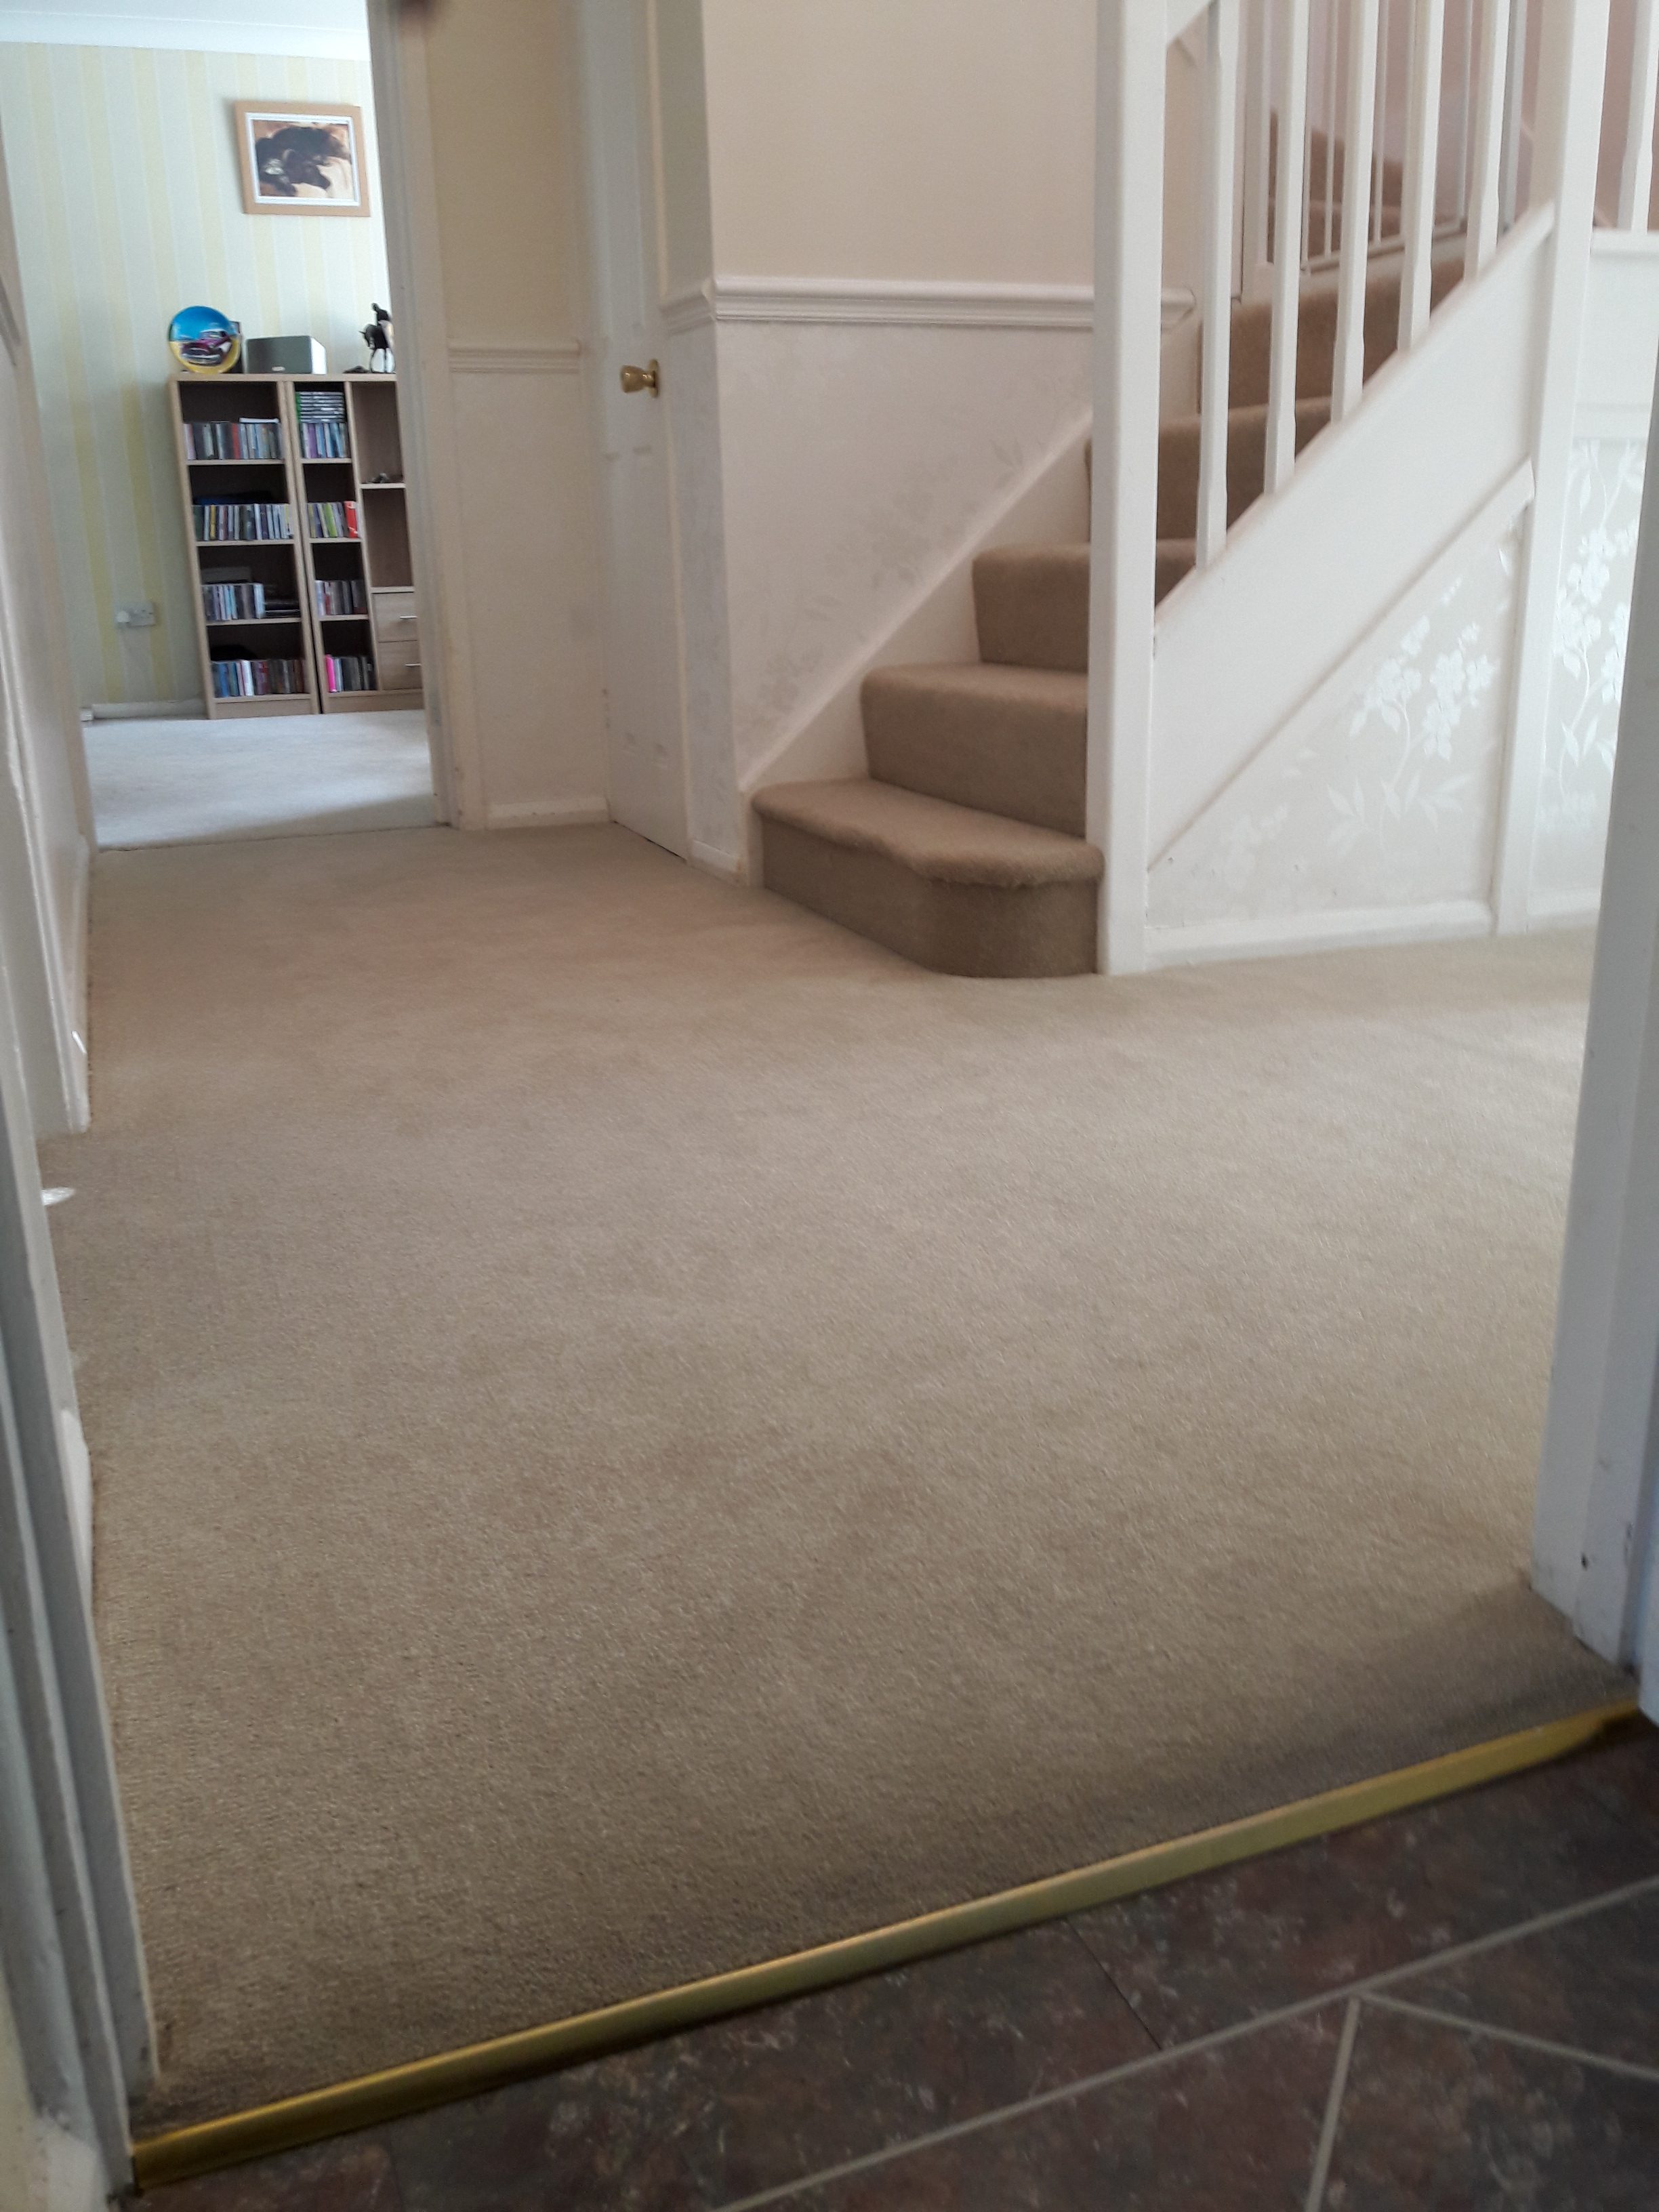 Cormar carpet in hallway and stairs, horsham, west sussex